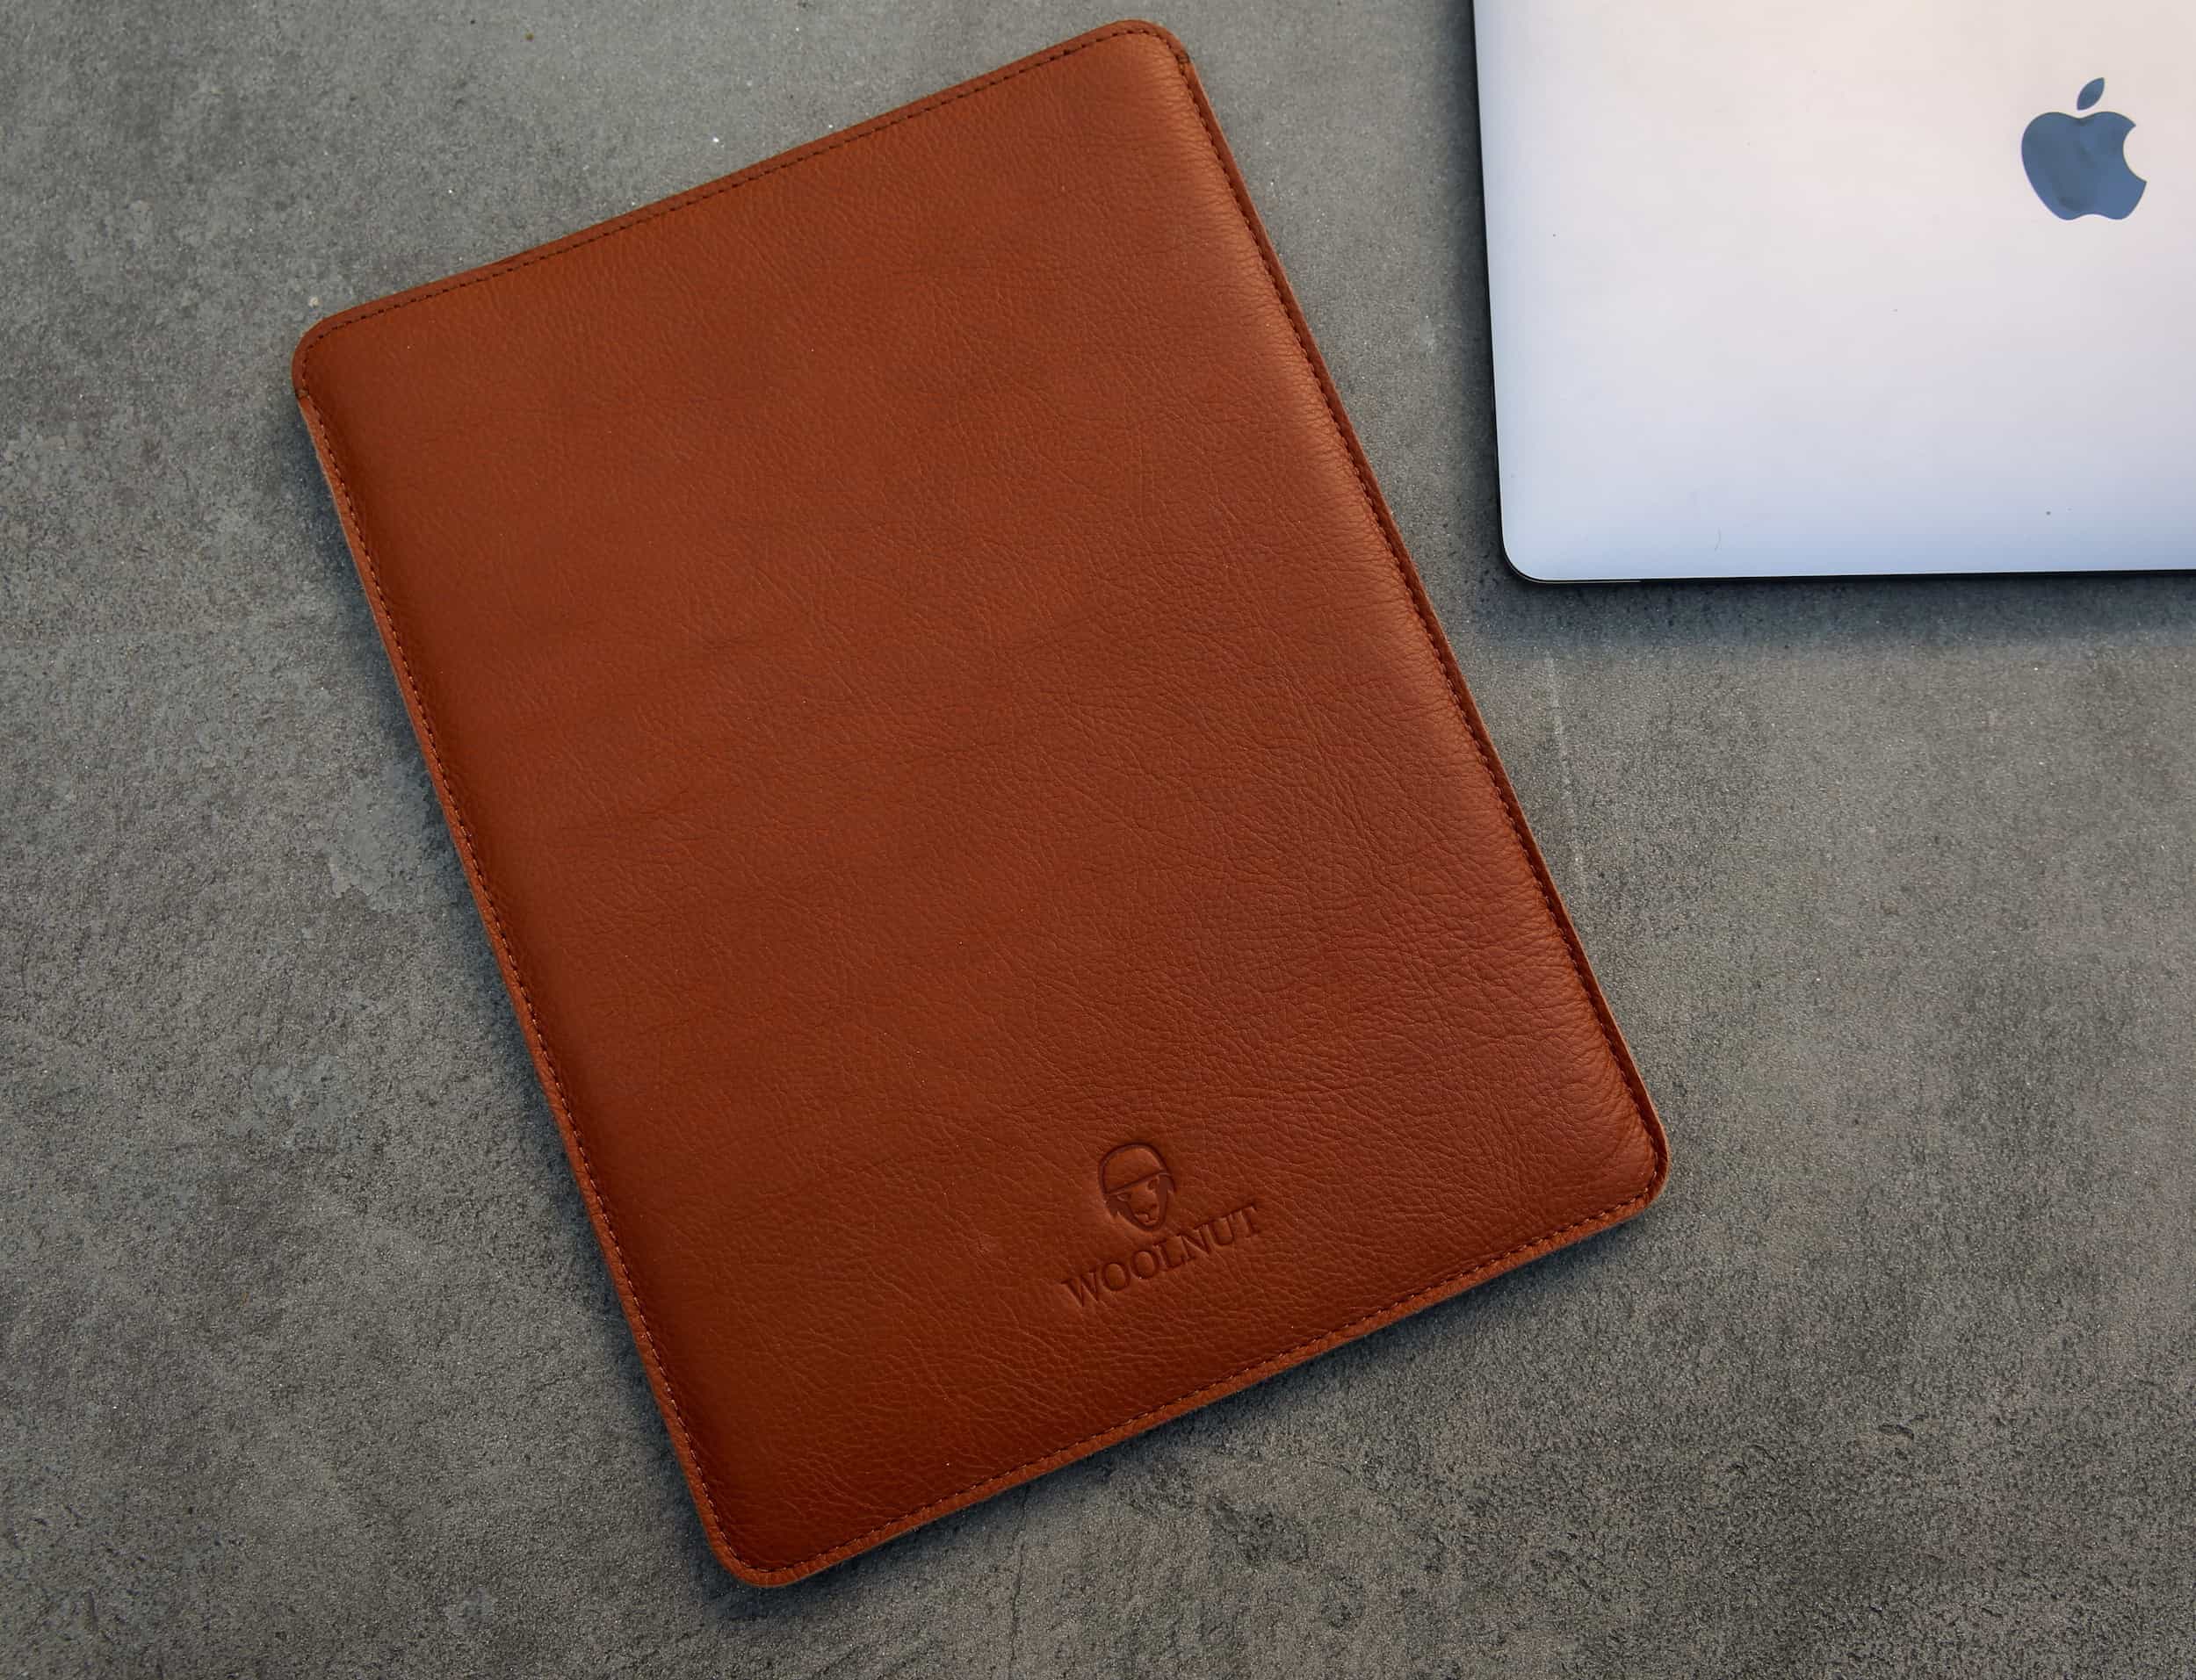 The Woolnut sleeve is pure leather luxury for your MacBook.